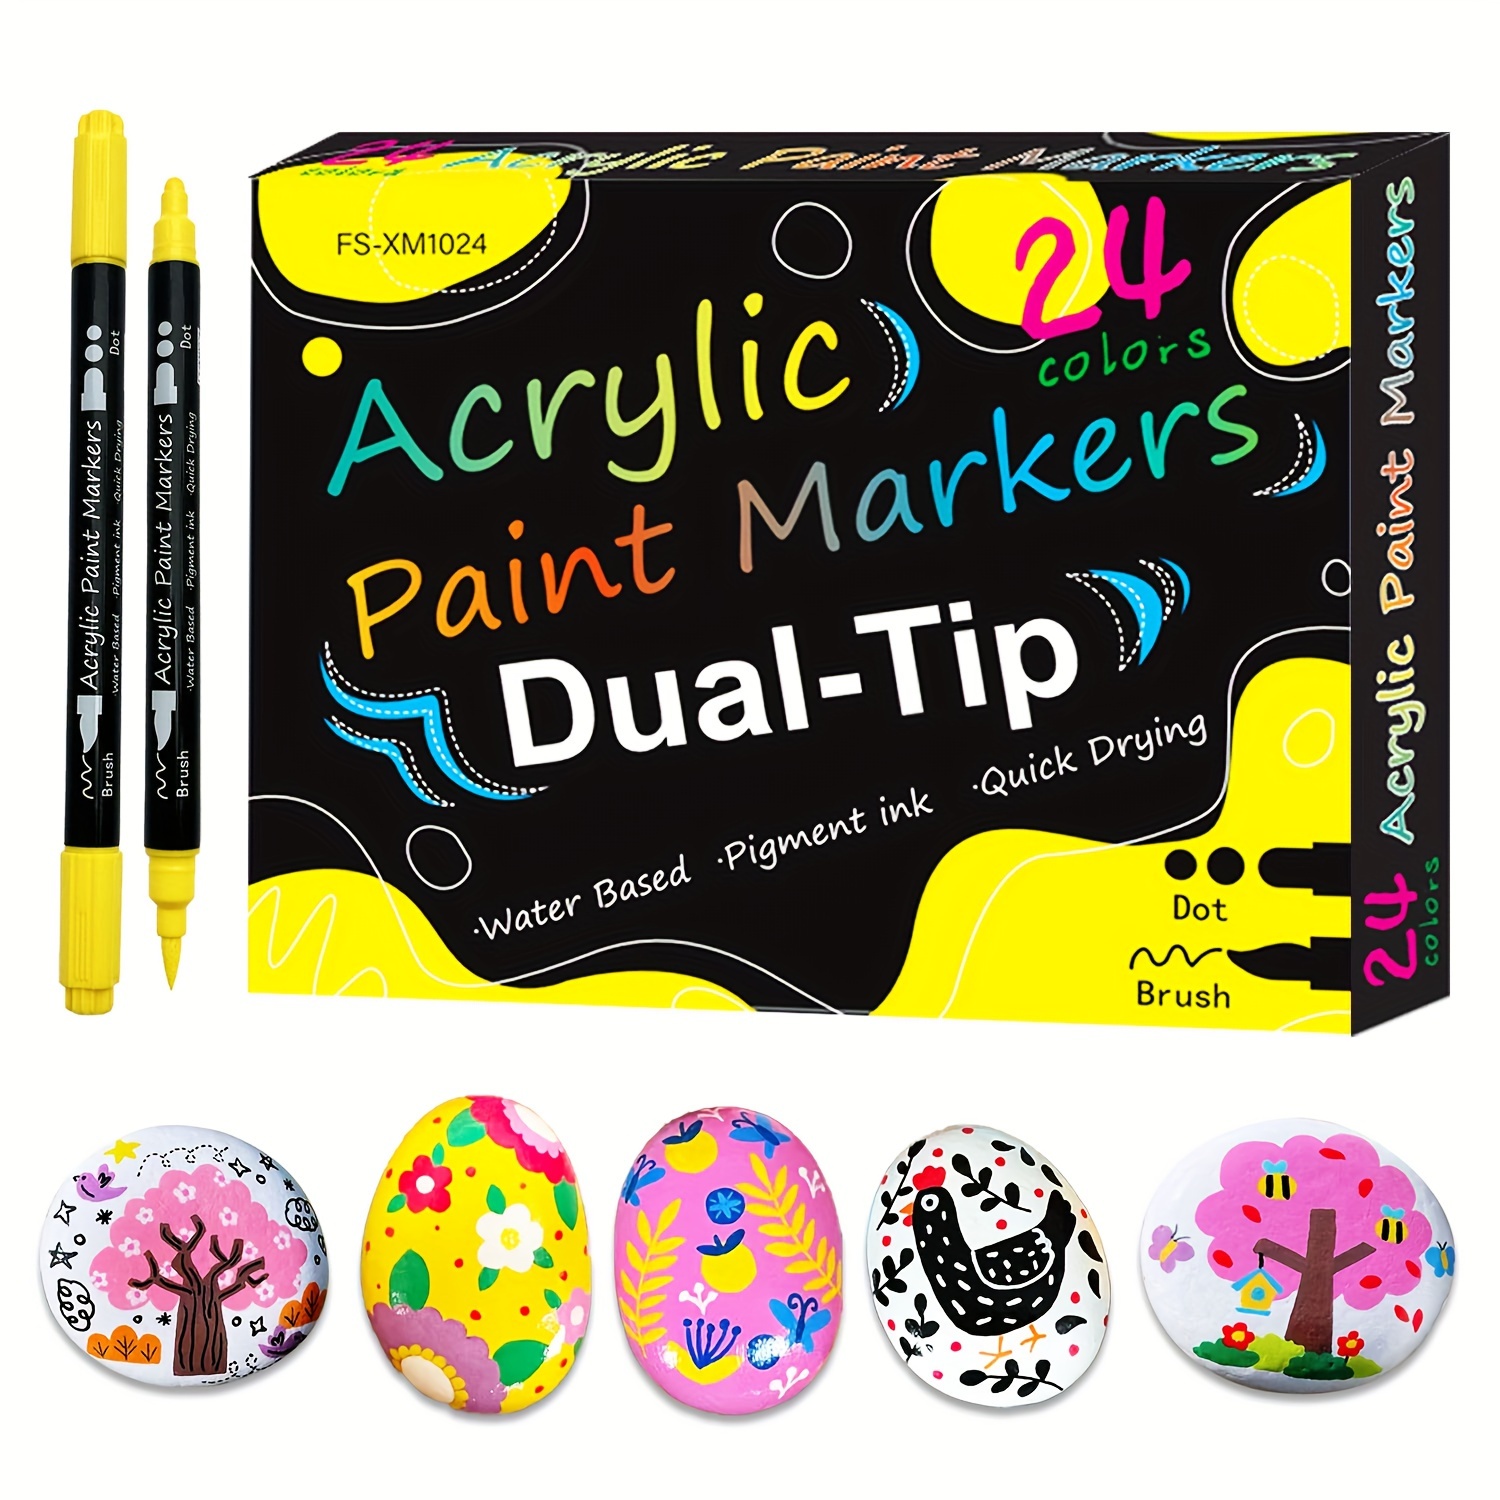  JR.WHITE Acrylic Paint Pens Paint Markers Set of 24: Extra Fine  Point Acrylic Markers For Rock Painting Wood Glass Fabric Ceramic For  Adults Kids Art Craft : Arts, Crafts & Sewing